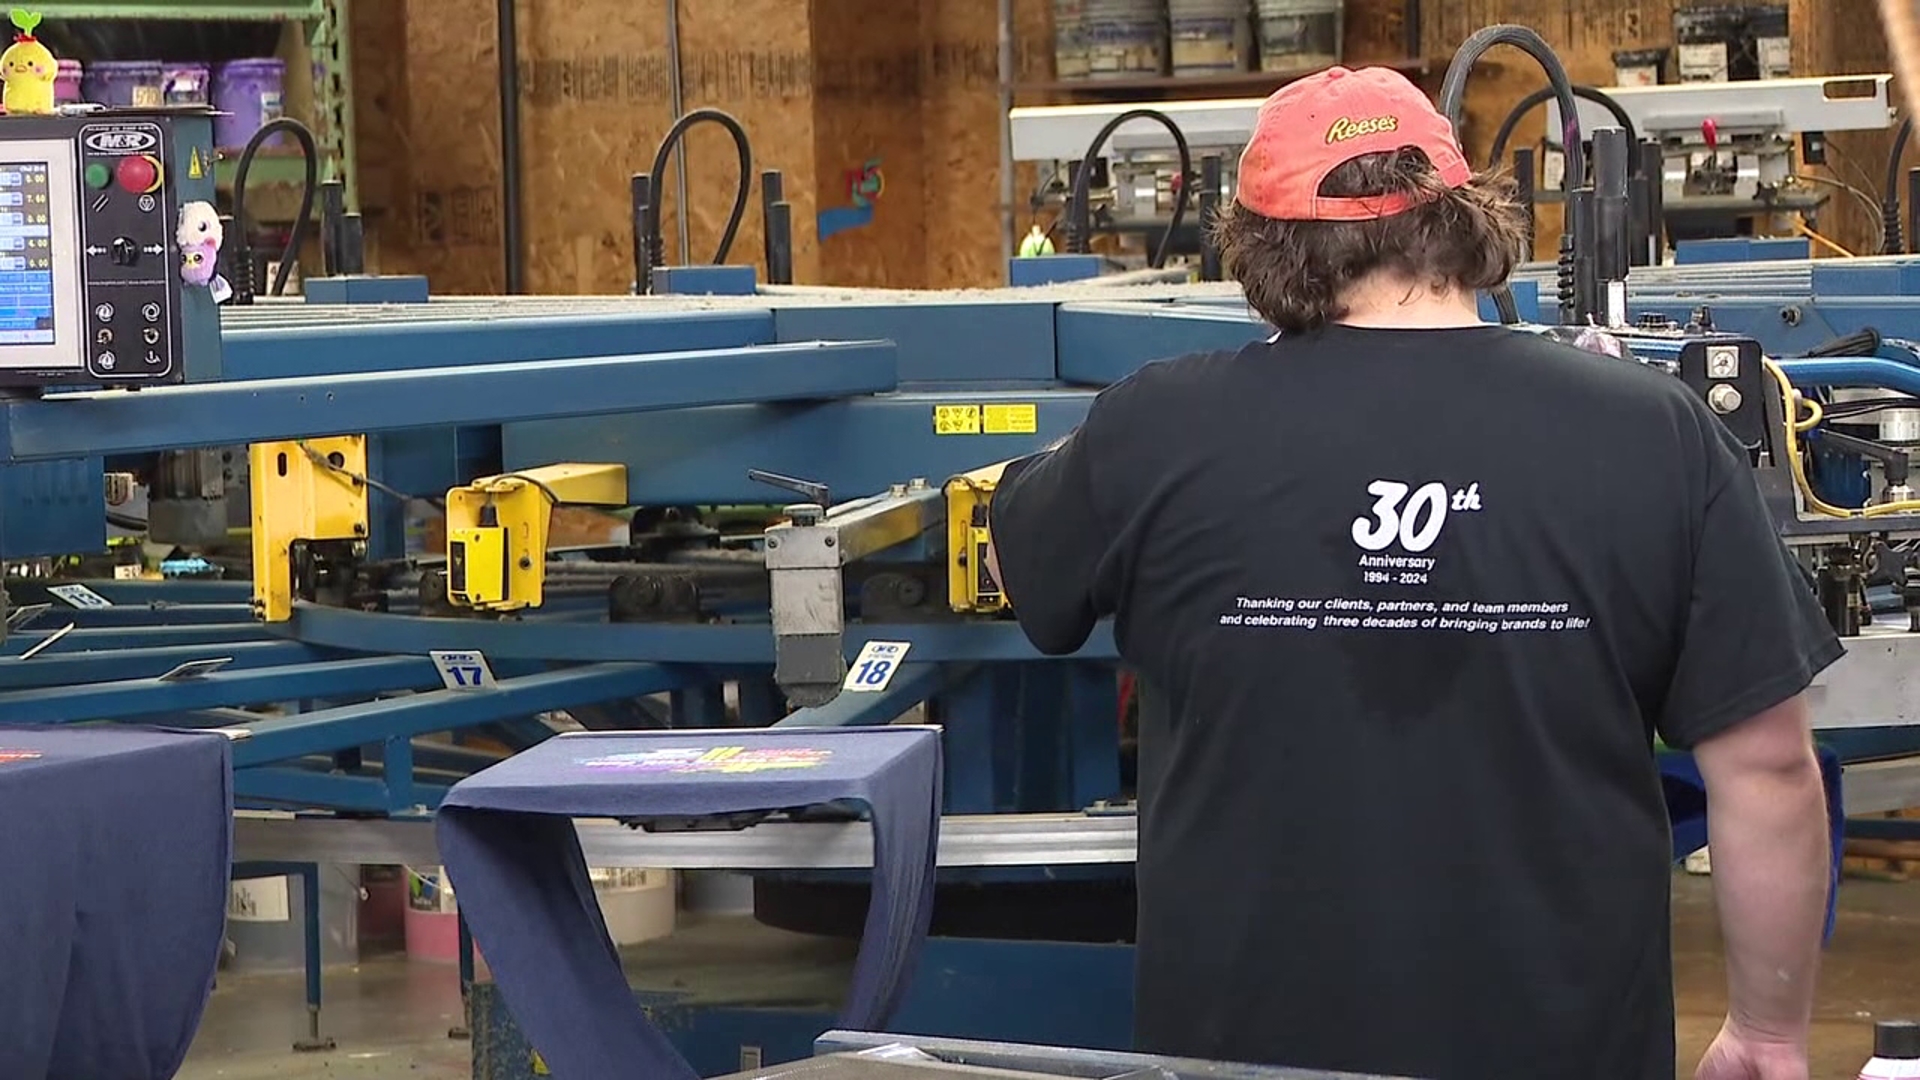 A screen printing business in Scranton is celebrating a big anniversary on Thursday.